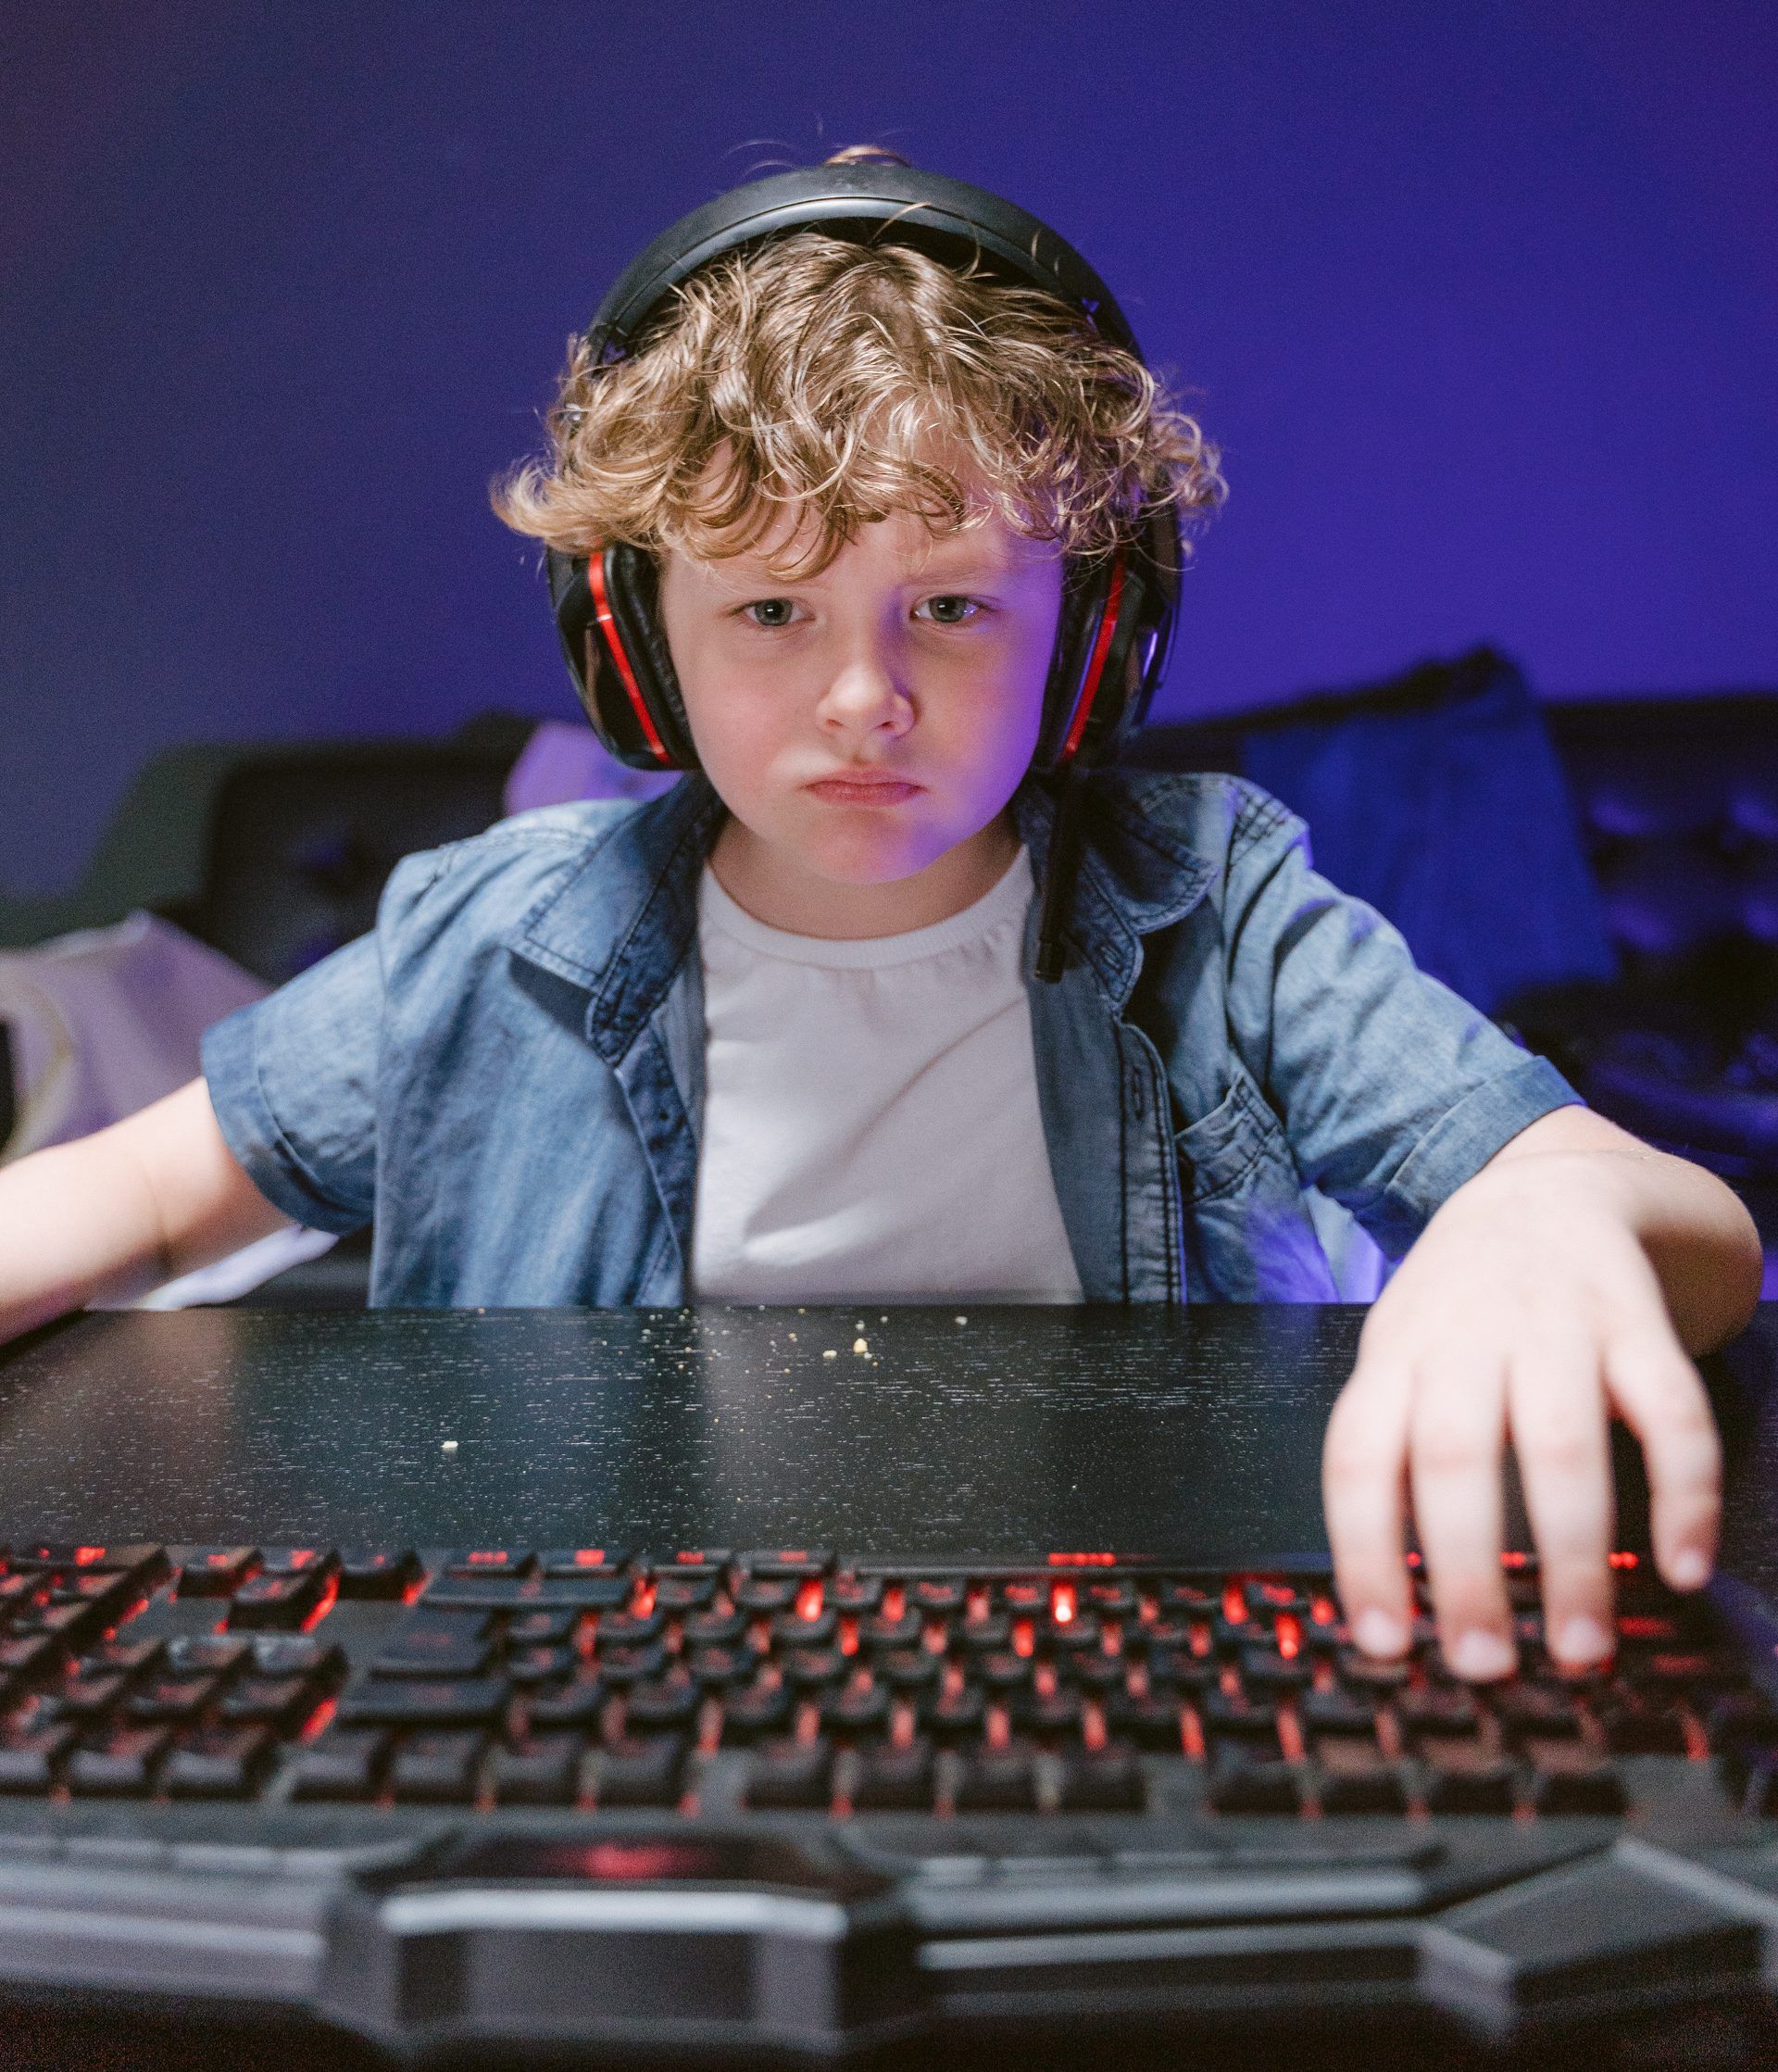 Scammers target kids on Fortnite and Roblox